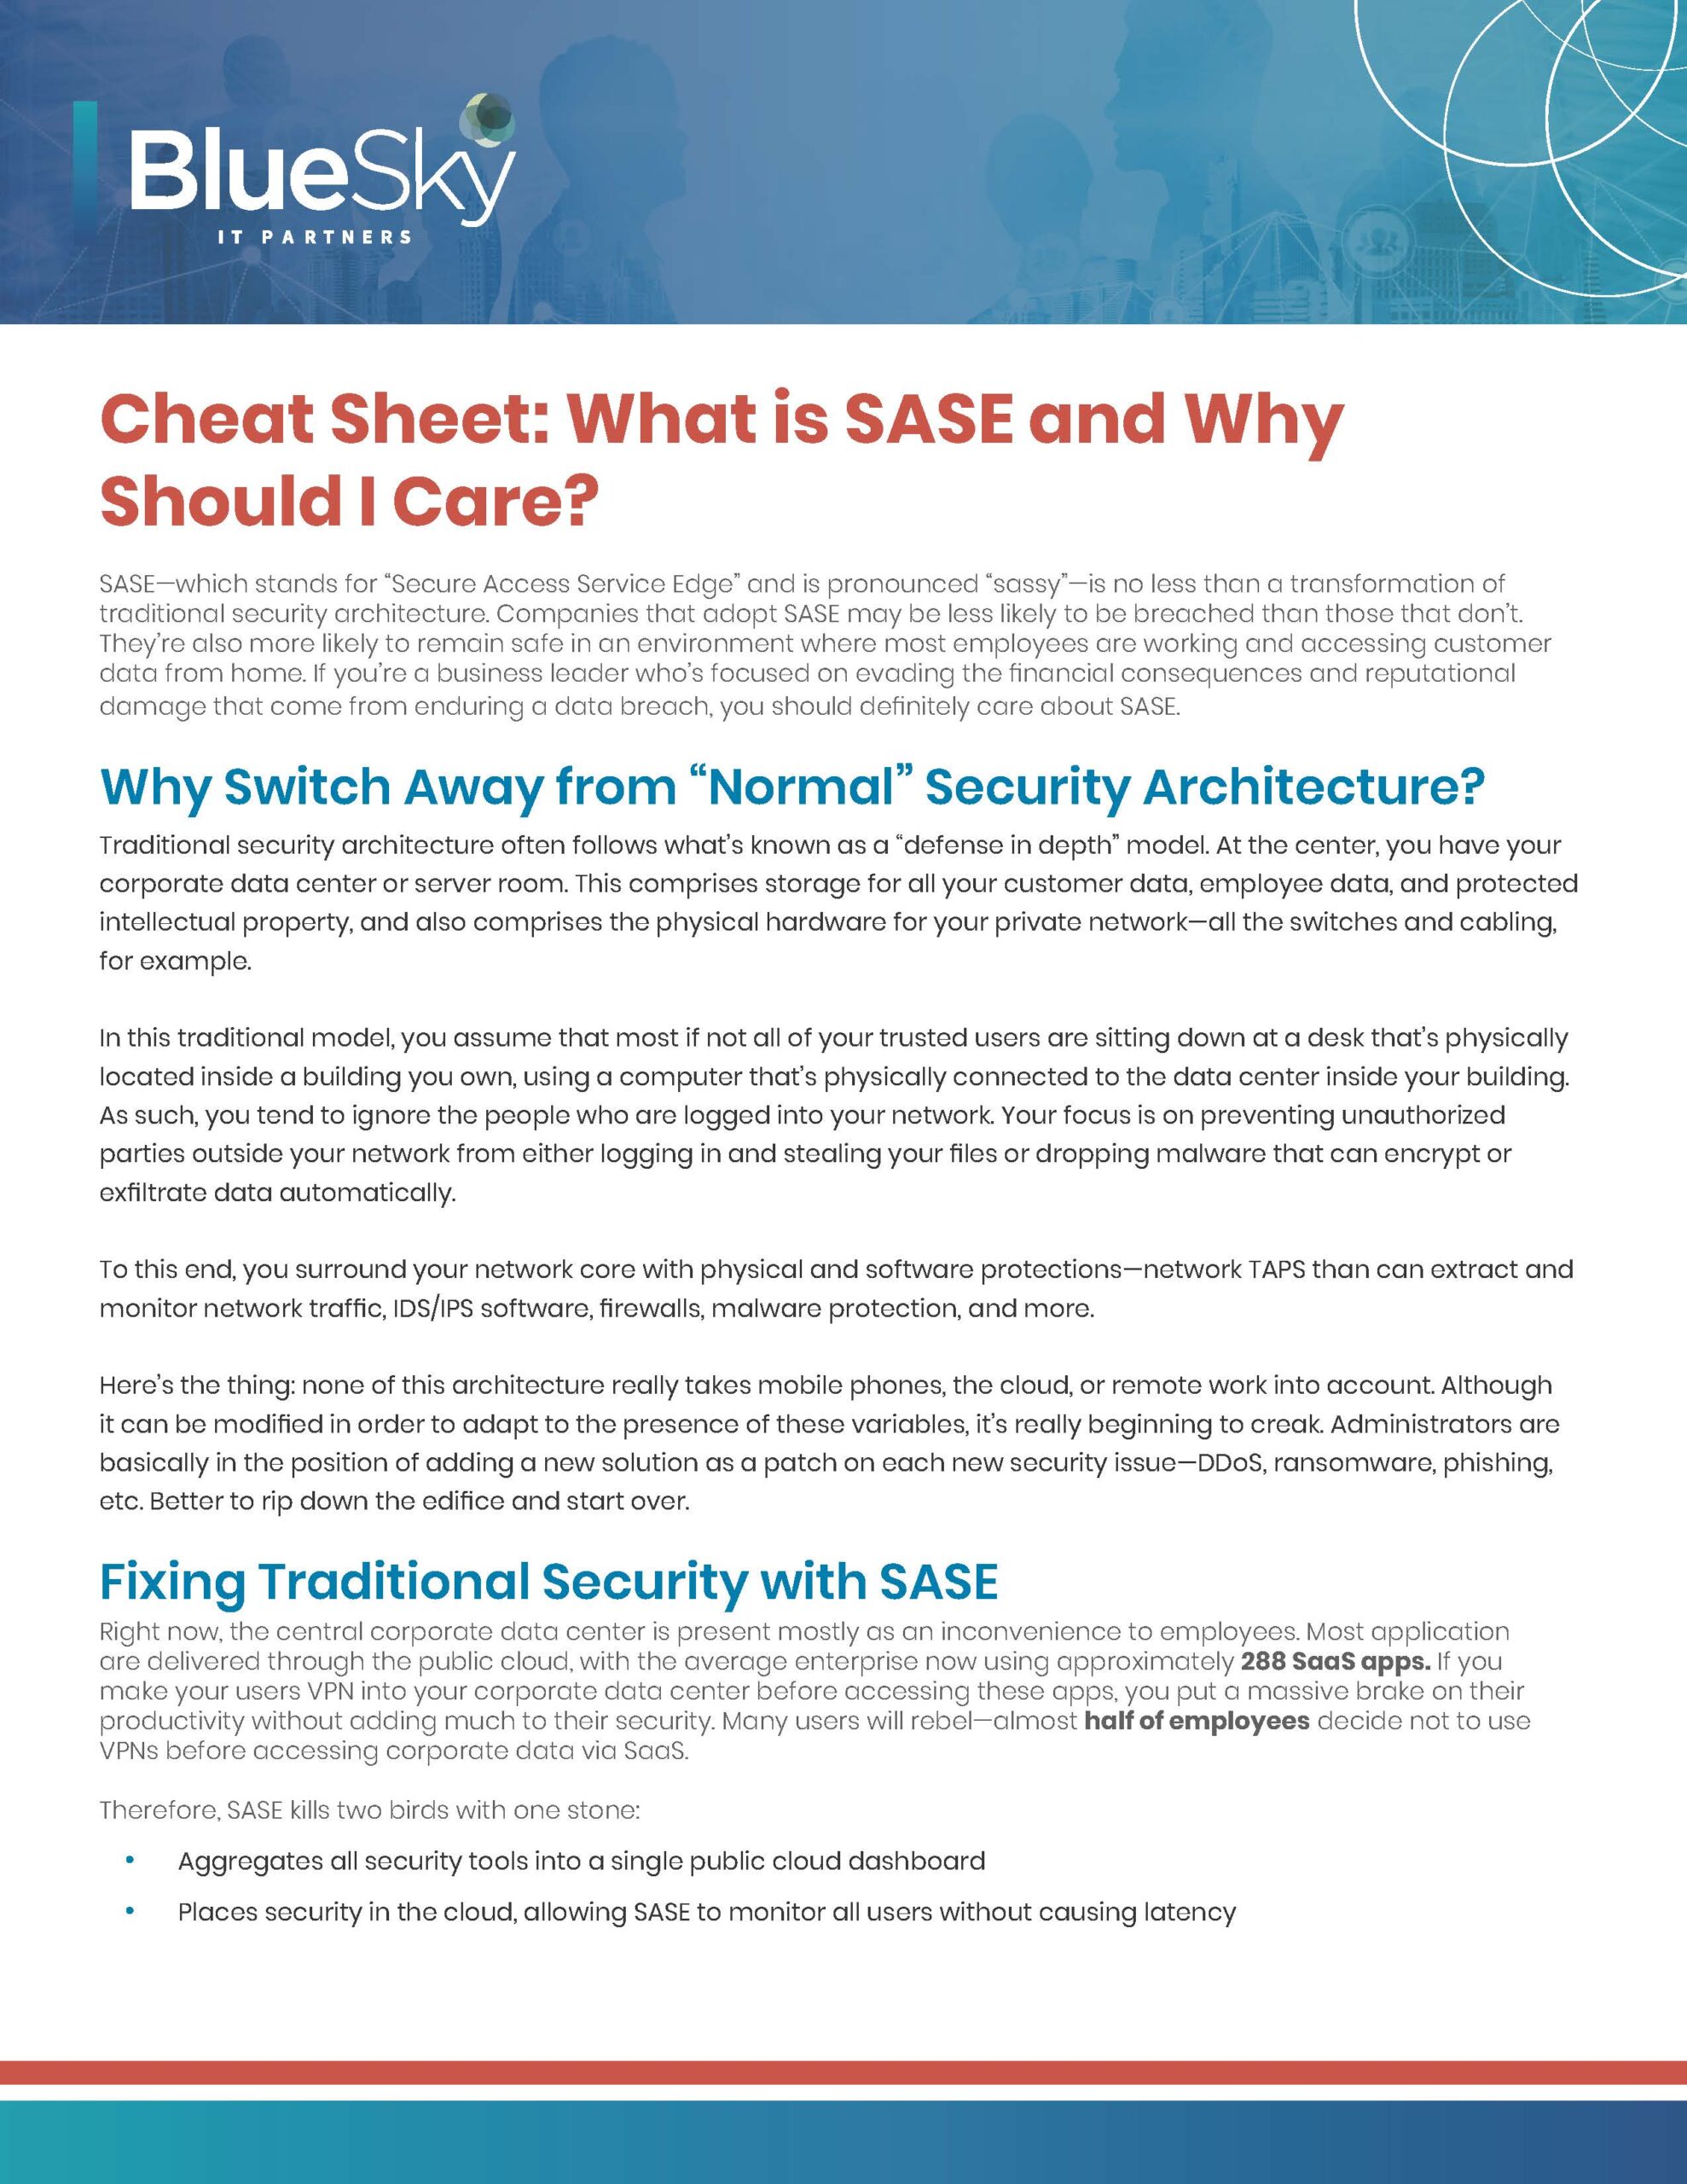 918874 BlueSky What is Sase Cheat Sheet preview 121420 1